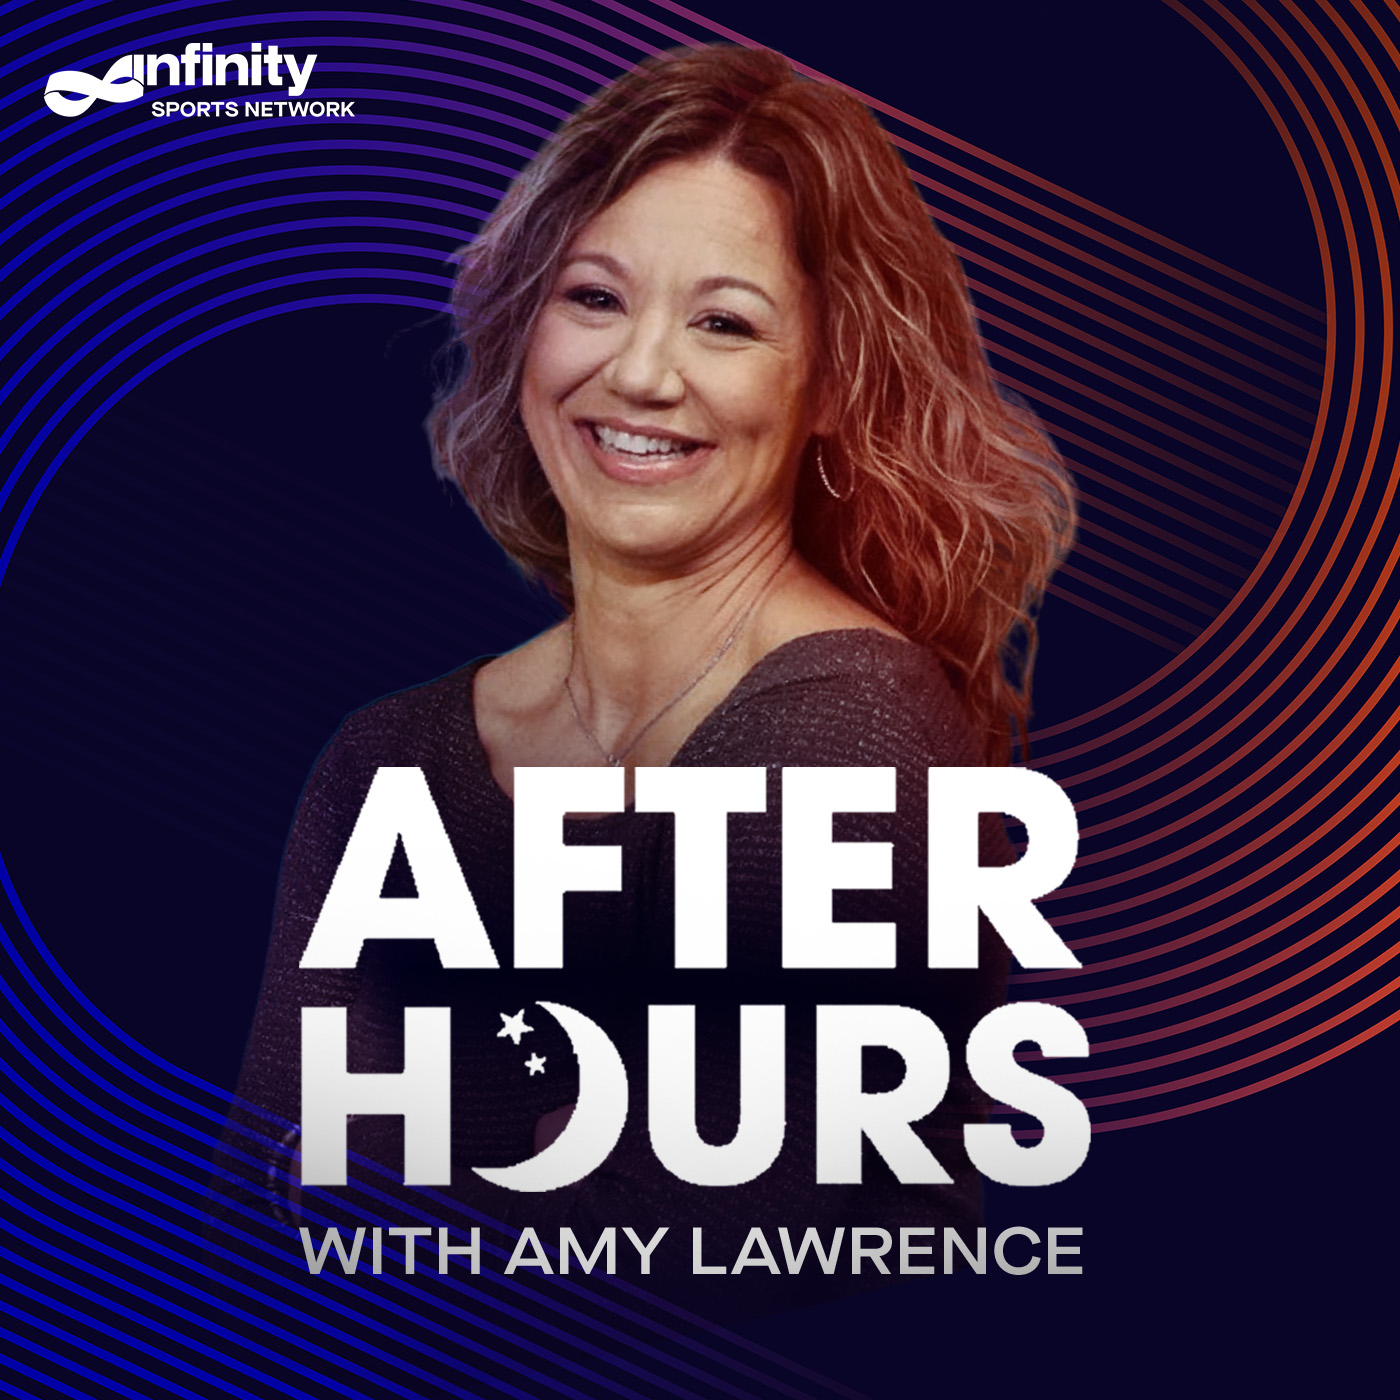 8-23-21 After Hours with Amy Lawrence PODCAST: Hour 3